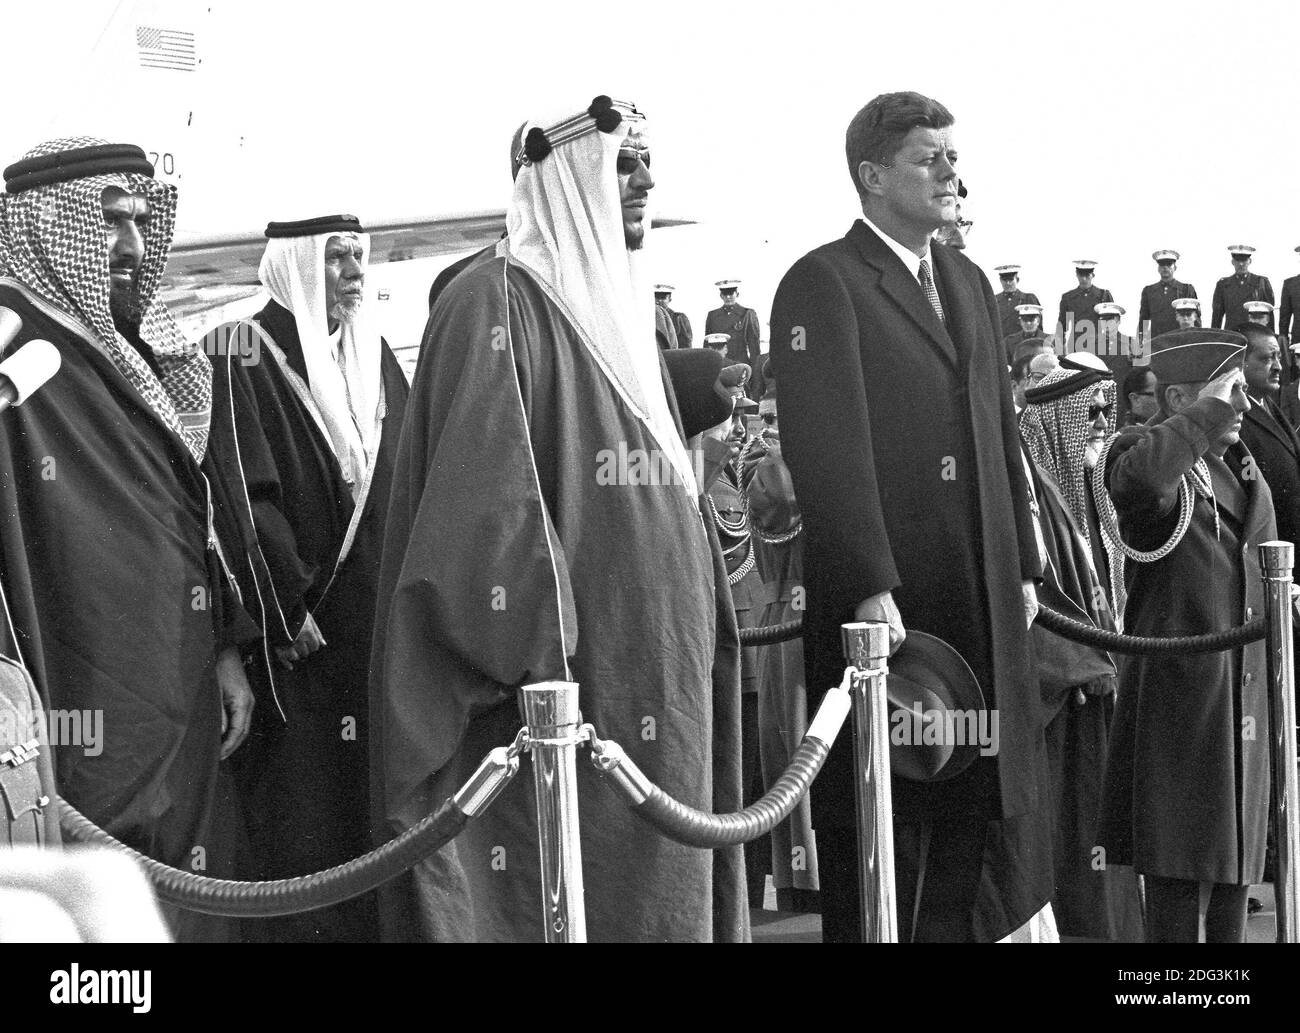 King Saud bin Abdulaziz Al Saud of Saudi Arabia makes remarks as he is welcomed to the United States by US President John F. Kennedy during a ceremony at Andrews Air Force Base, Maryland on February 13, 1962. From left to right: unidentified, President Kennedy, King Saud, US Secretary of State Dean Rusk, unidentified, and unidentified.Photo by Arnie Sachs / CNP /ABACAPRESS.COM Stock Photo